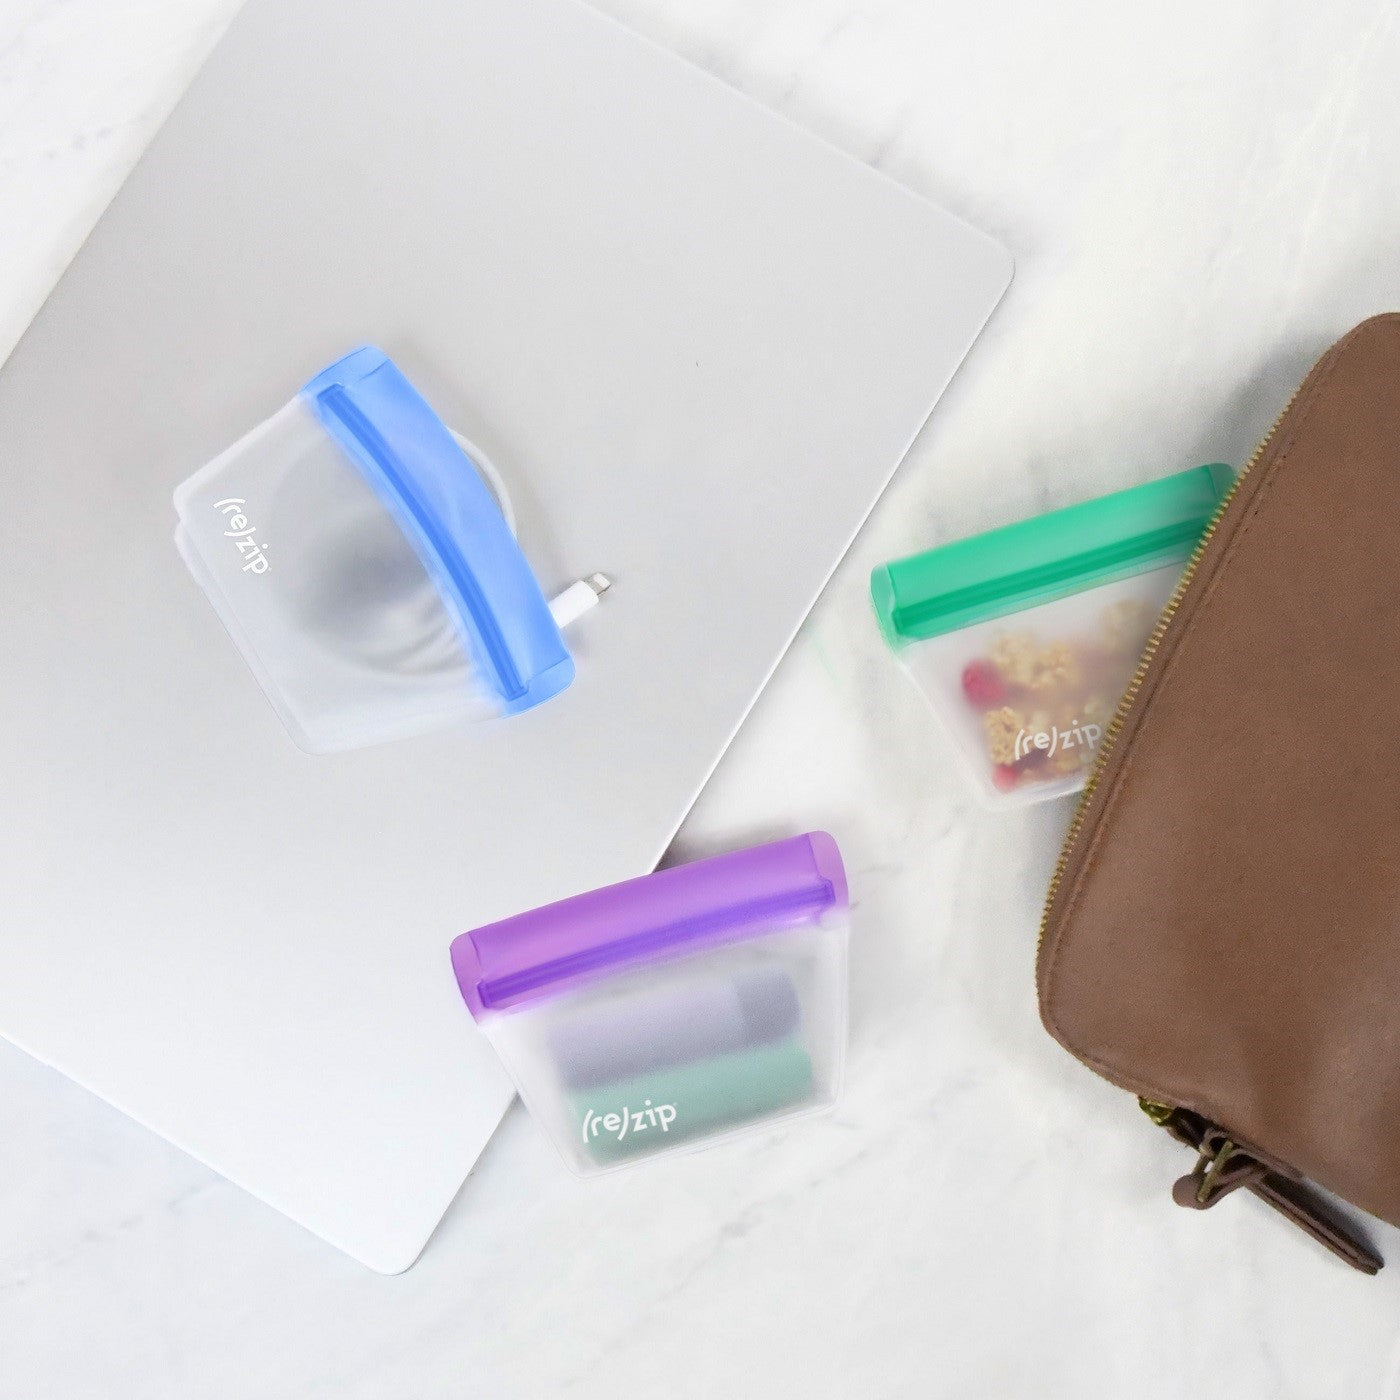 reusable leakproof mini storage bags. Great size for charging cables, lip balm, purse organization, snacks and more